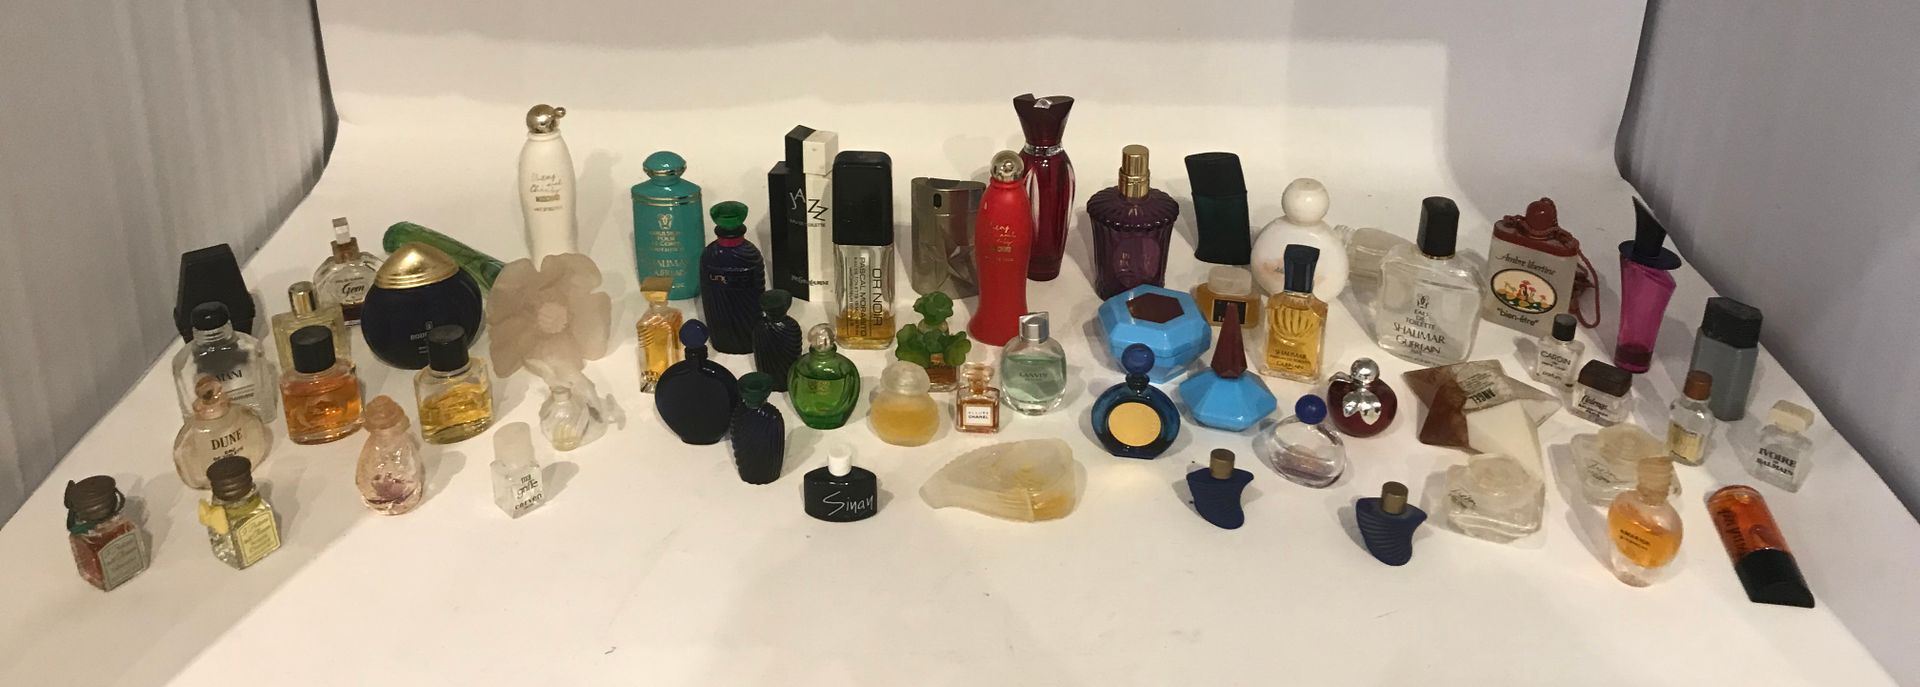 Null Lot of miniatures (59) of different brands of perfume

A set of empty minia&hellip;